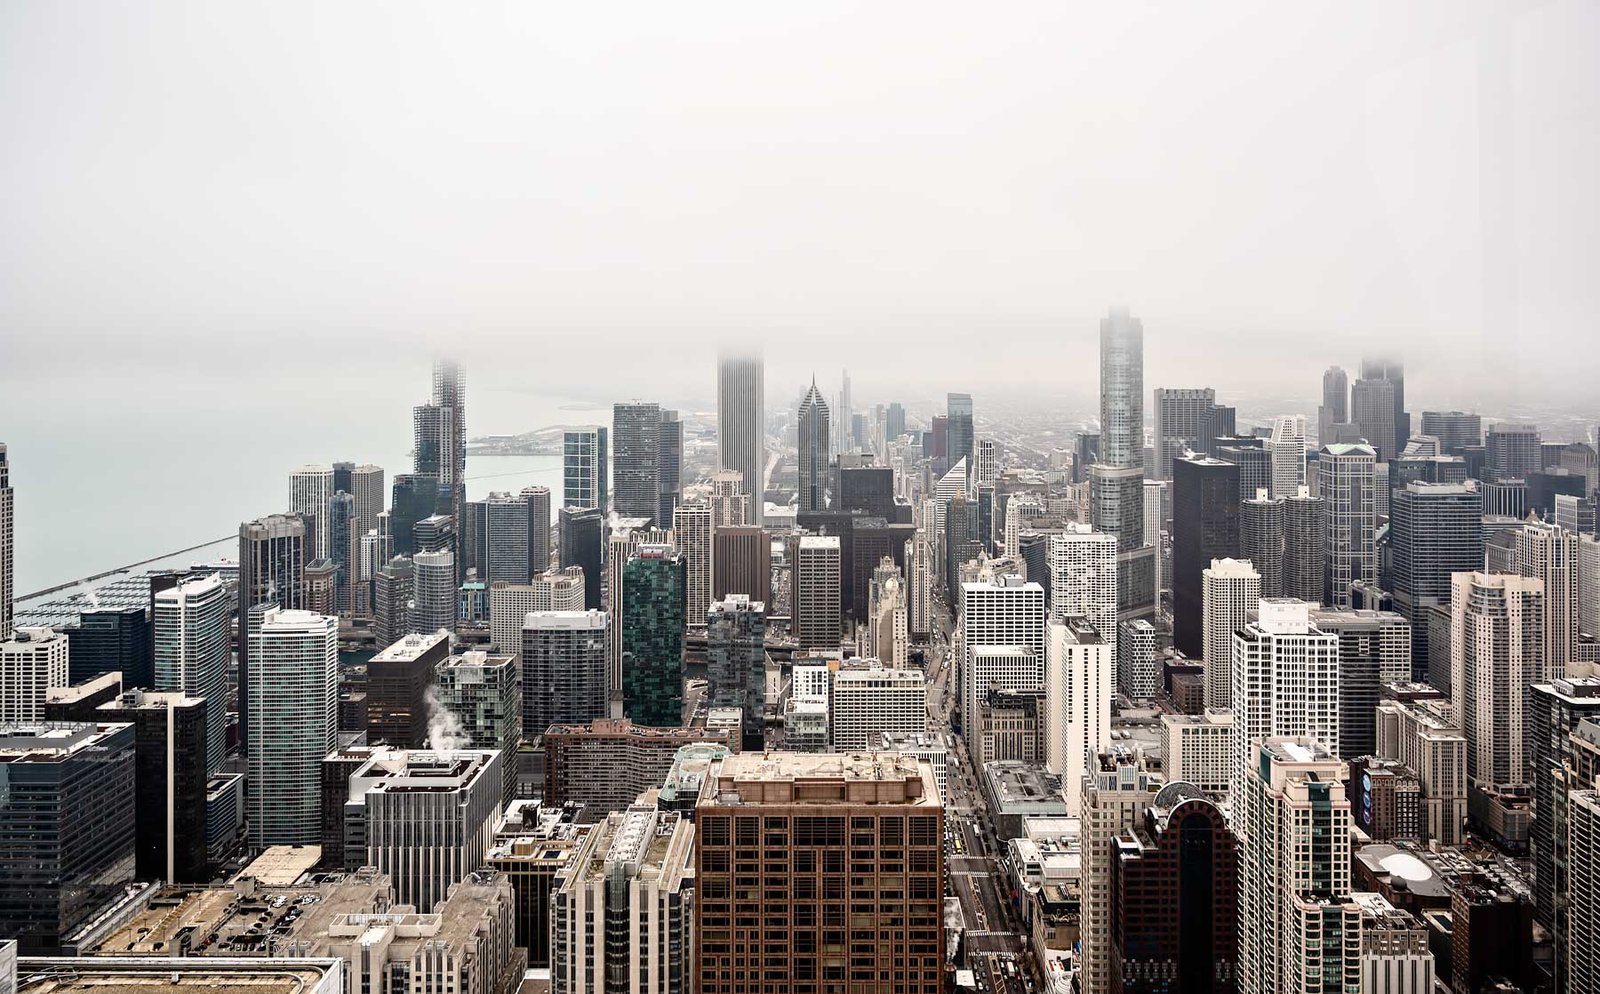 View of Chicago from above on a cloudy day at 360 Chicago in the John Hancock building - shot with the Nikon Z6